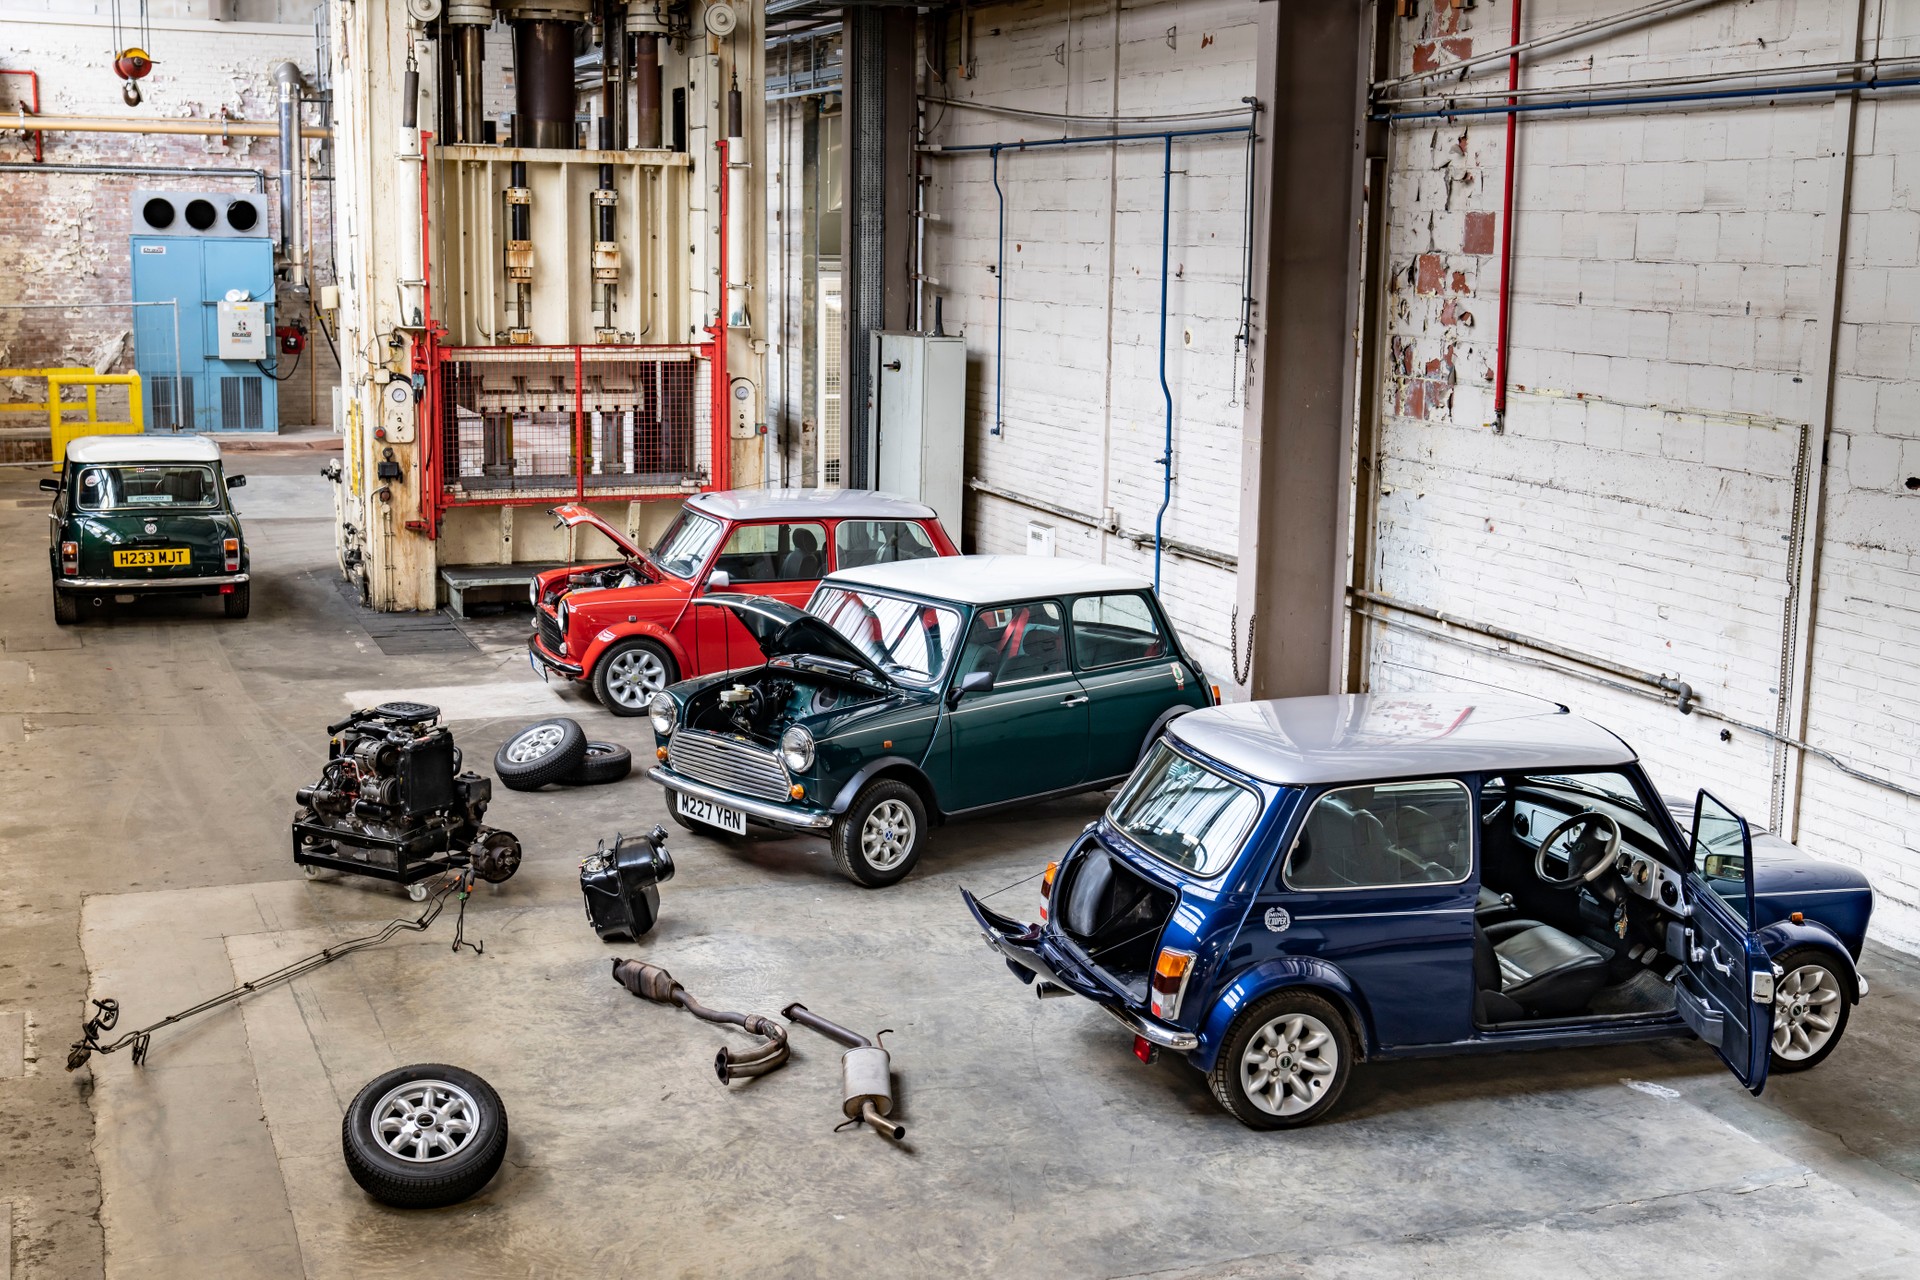 MINI converts its classic models into electric cars using Recharged software